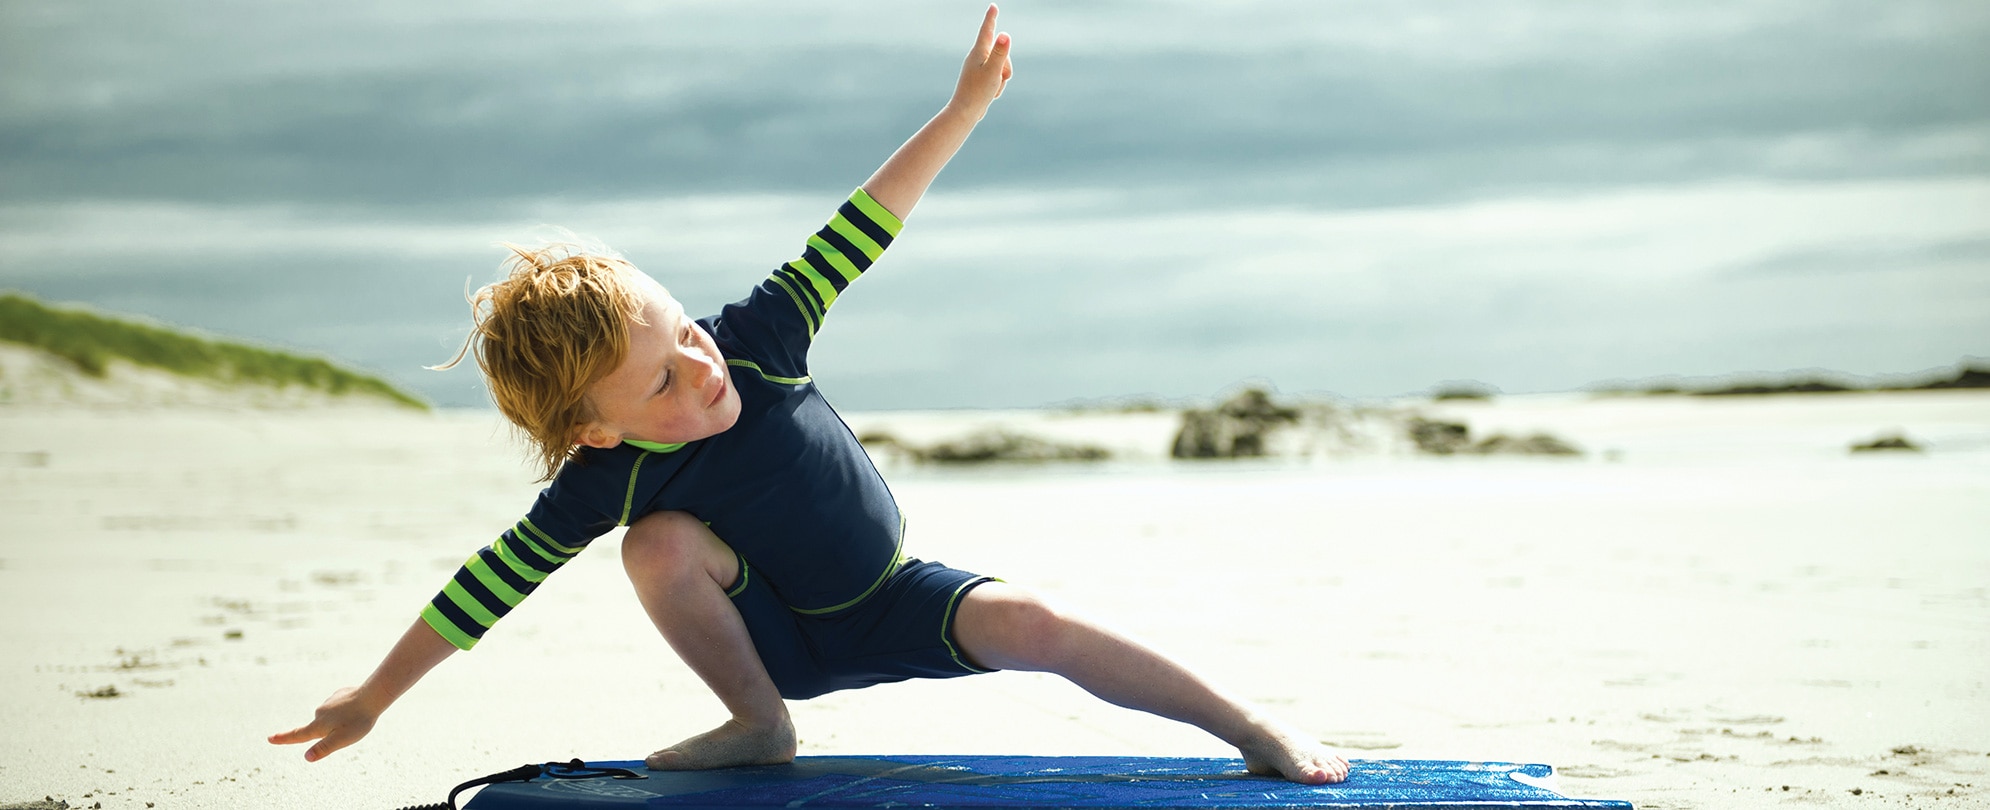 A little boy pretends to surf on the beach during his WorldMark vacation.